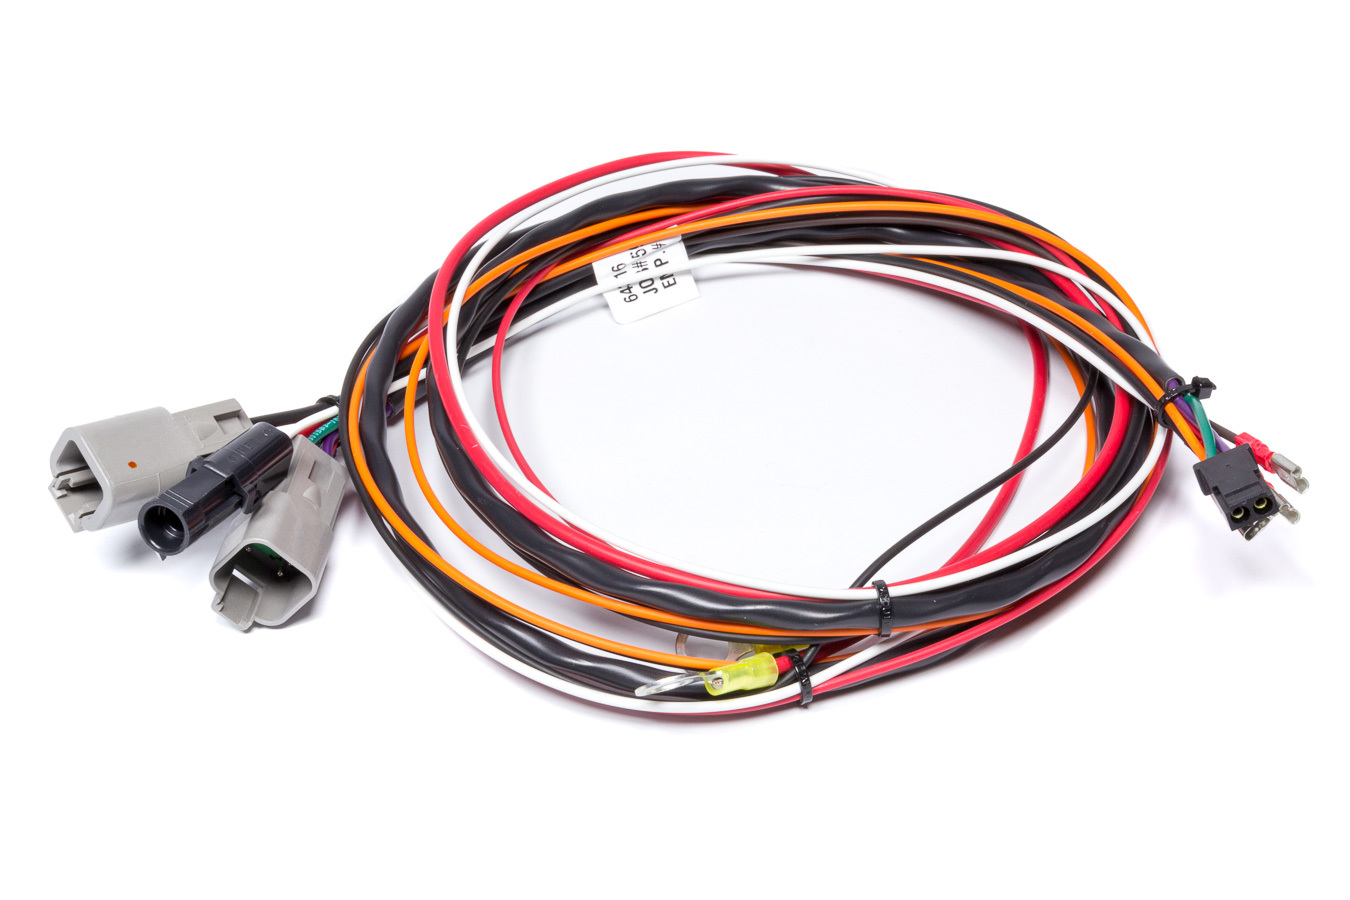 Replacement Harness for 64316 Rev Limiter - ASY25452